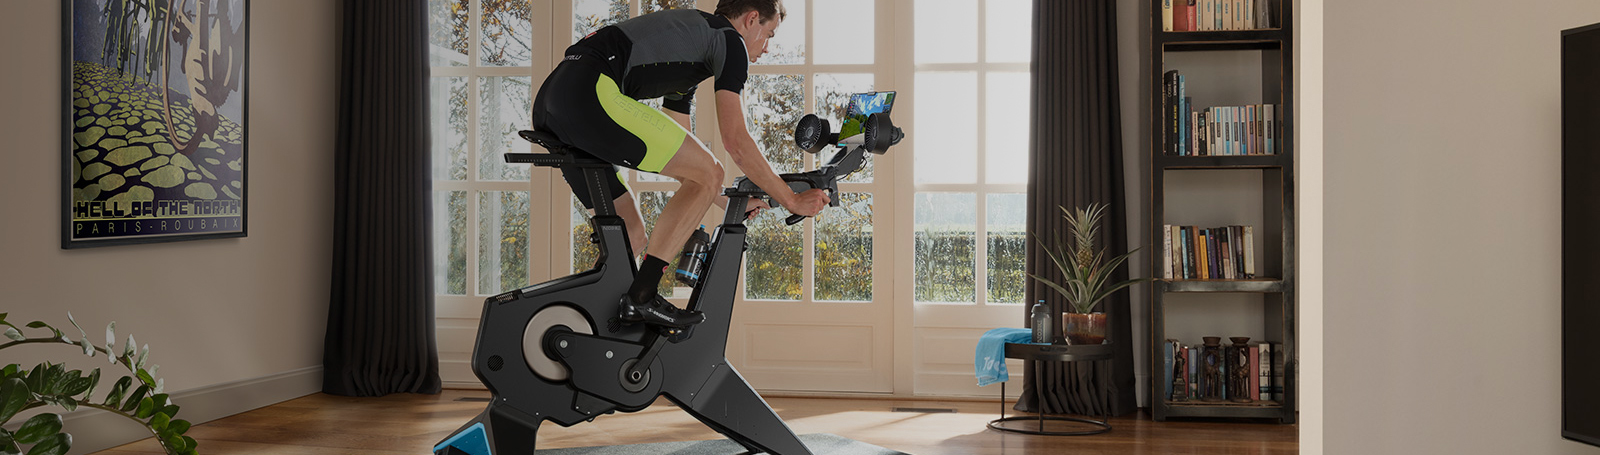 Tacx NEO Bike Smart Trainer | Strictly Bicycles